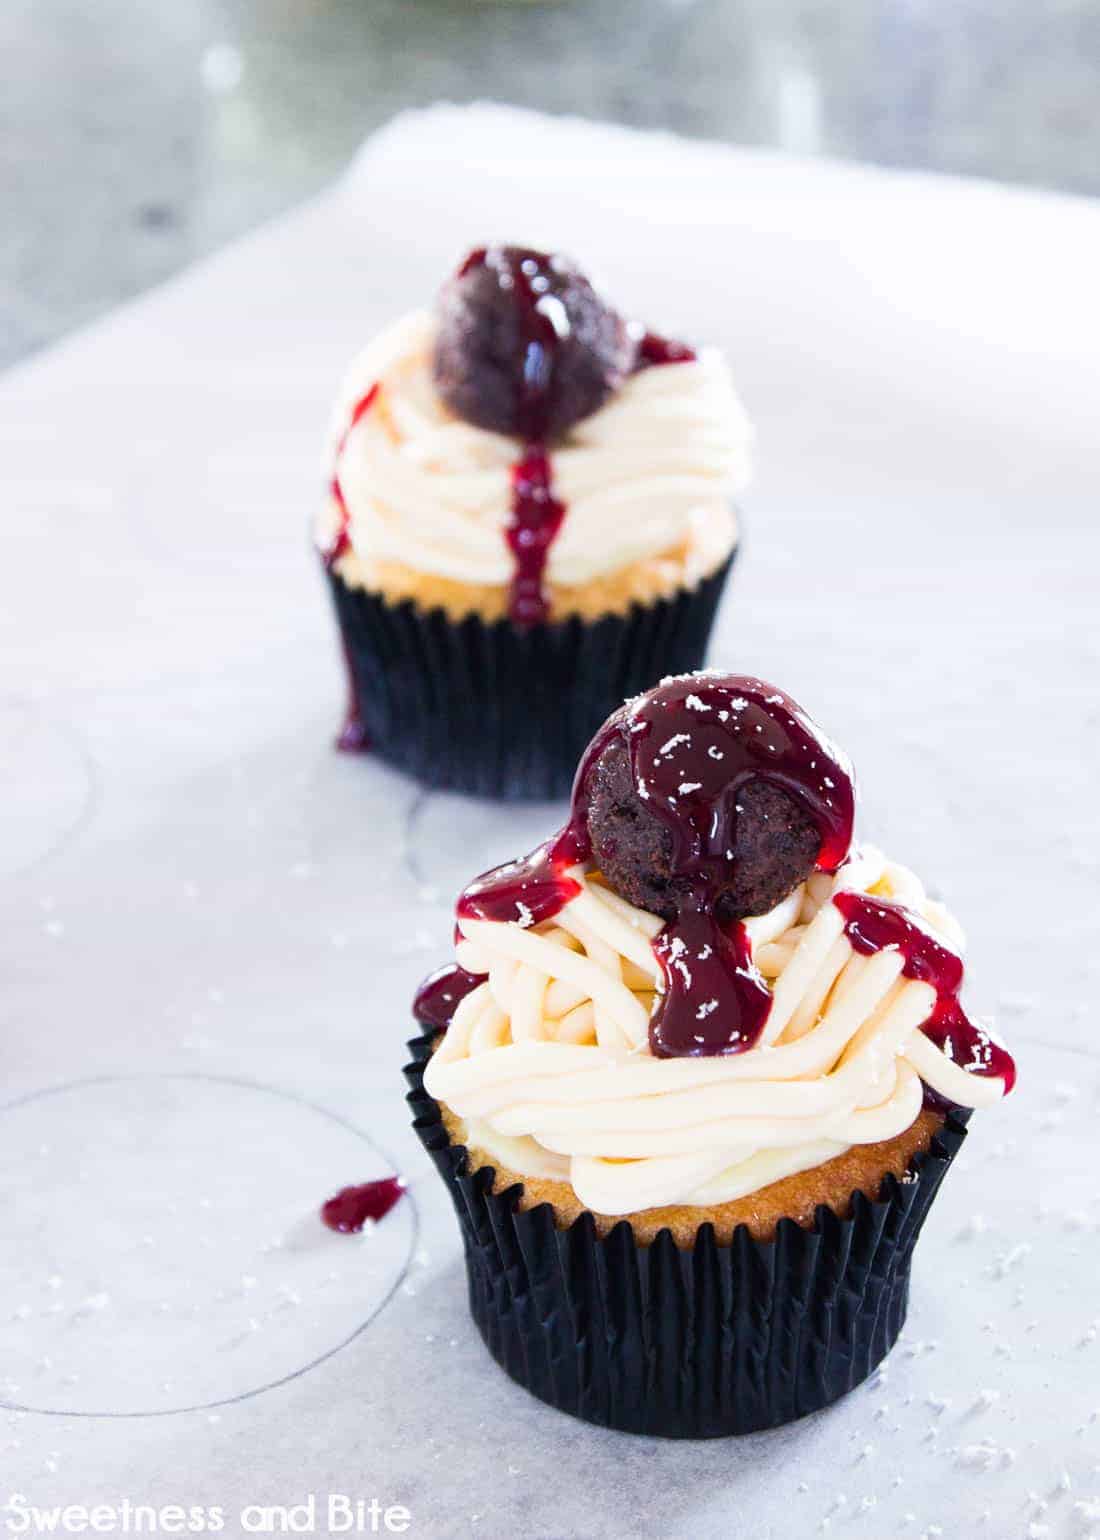 The cupcake finished with a drizzle of berry sauce and sprinkled with grated white chocolate.